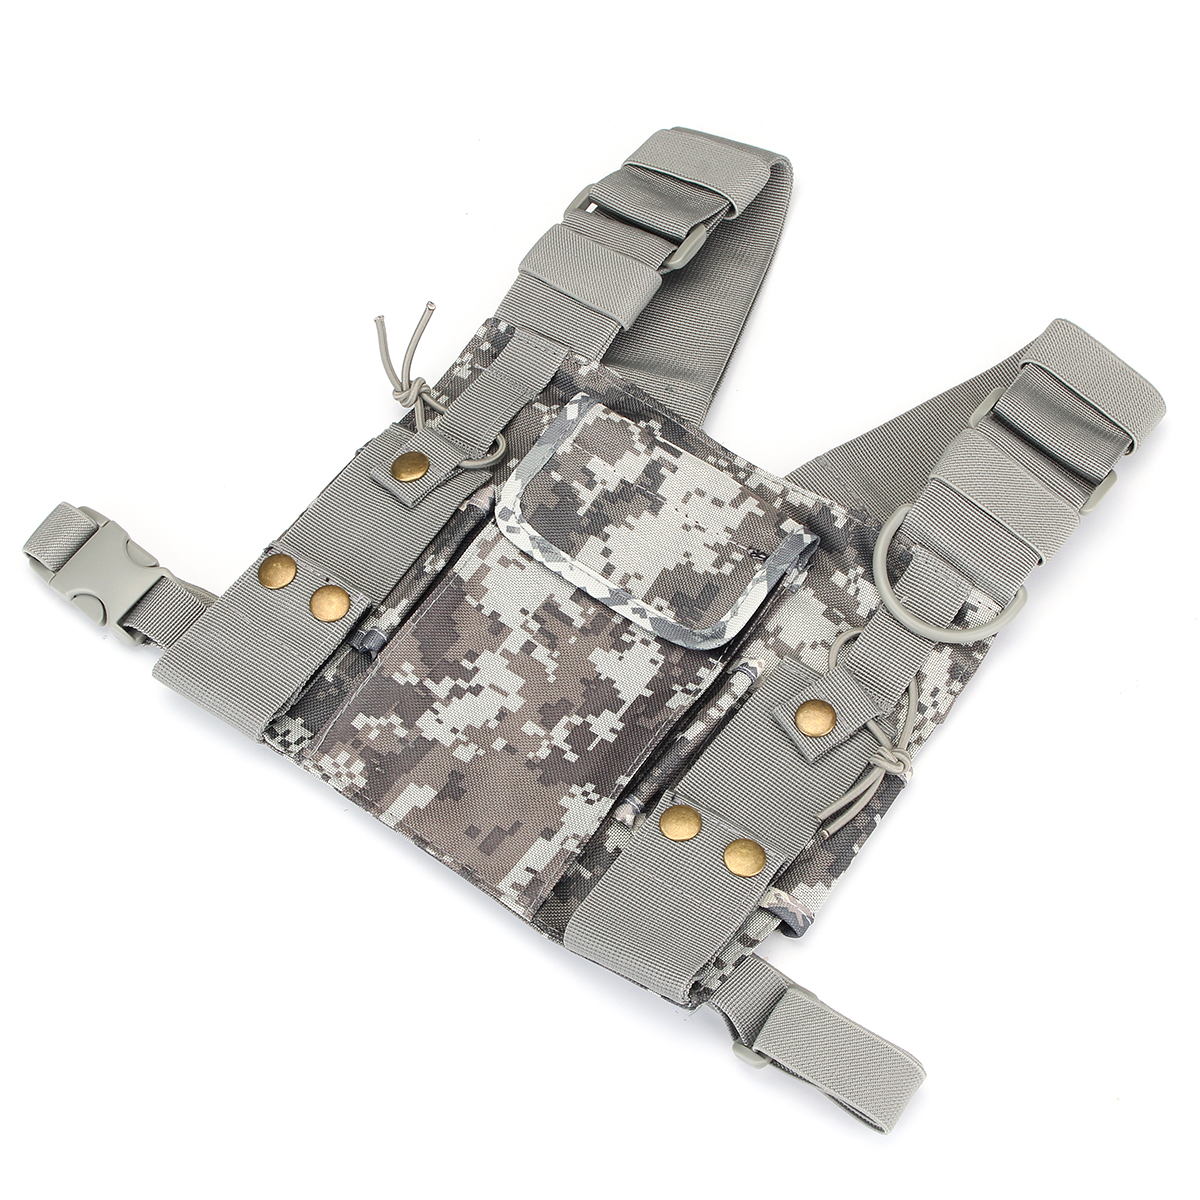 Find Radio Walkie Talkie Chest Pocket Harness Bag Backpack Holster Pouch Camouflage for Sale on Gipsybee.com with cryptocurrencies